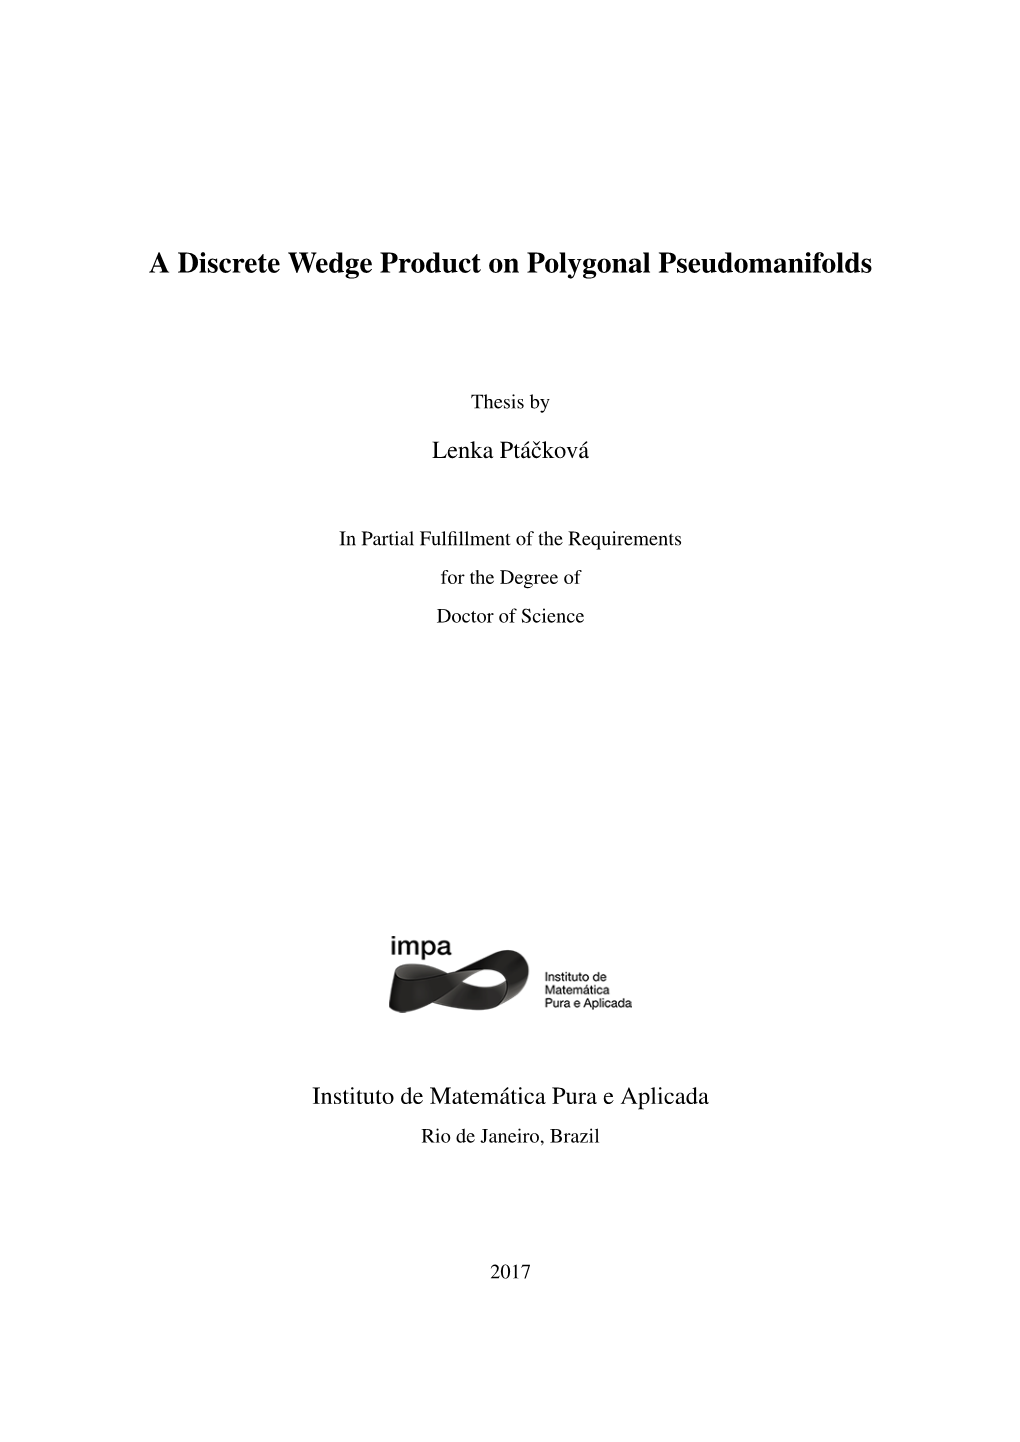 A Discrete Wedge Product on Polygonal Pseudomanifolds